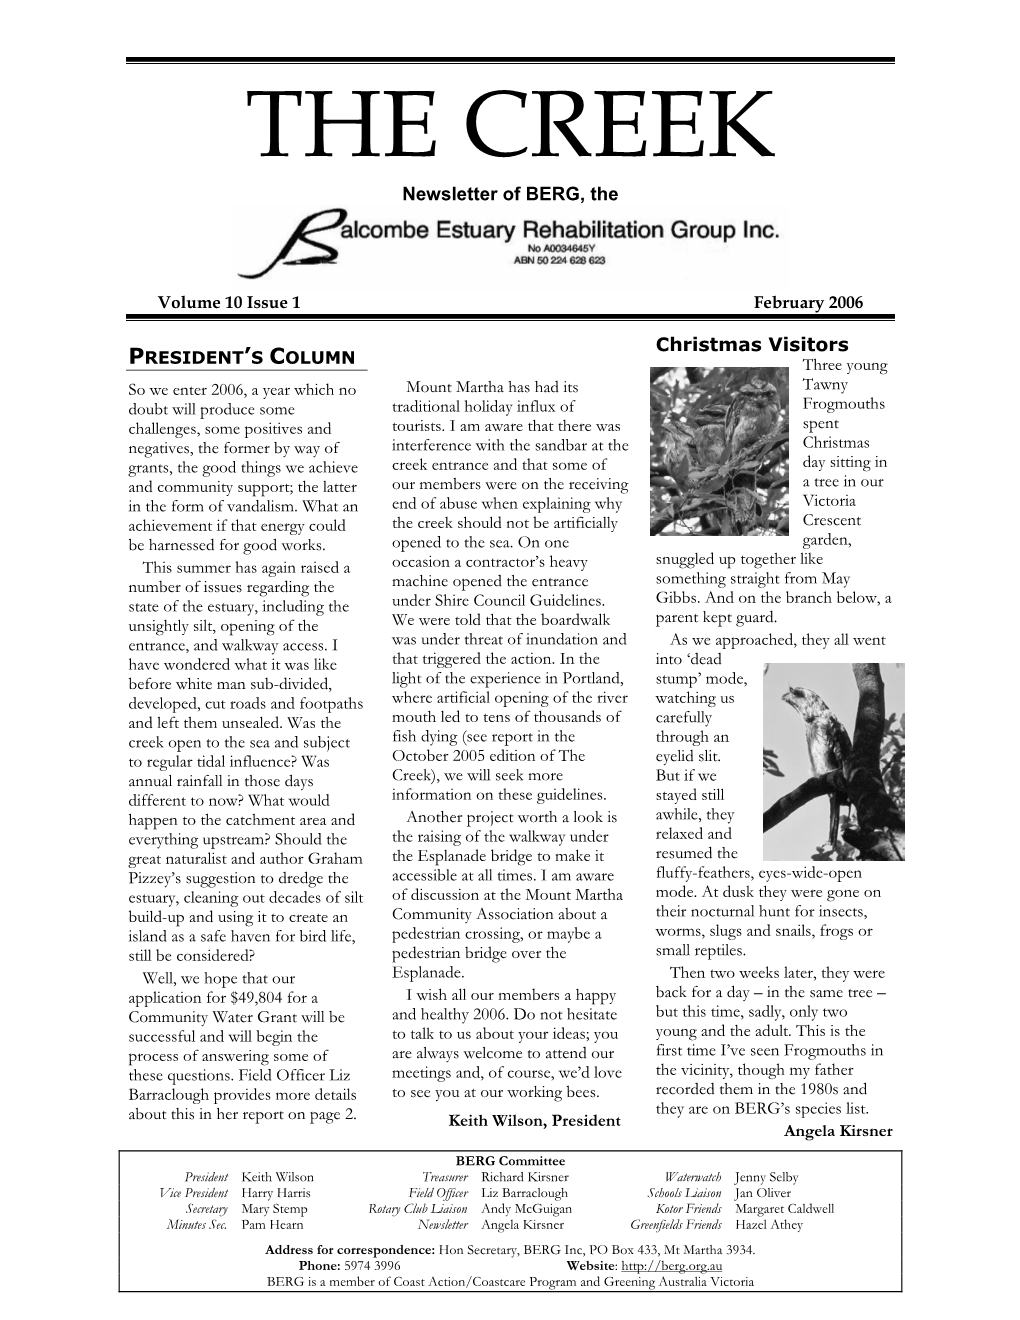 THE CREEK Newsletter of BERG, The